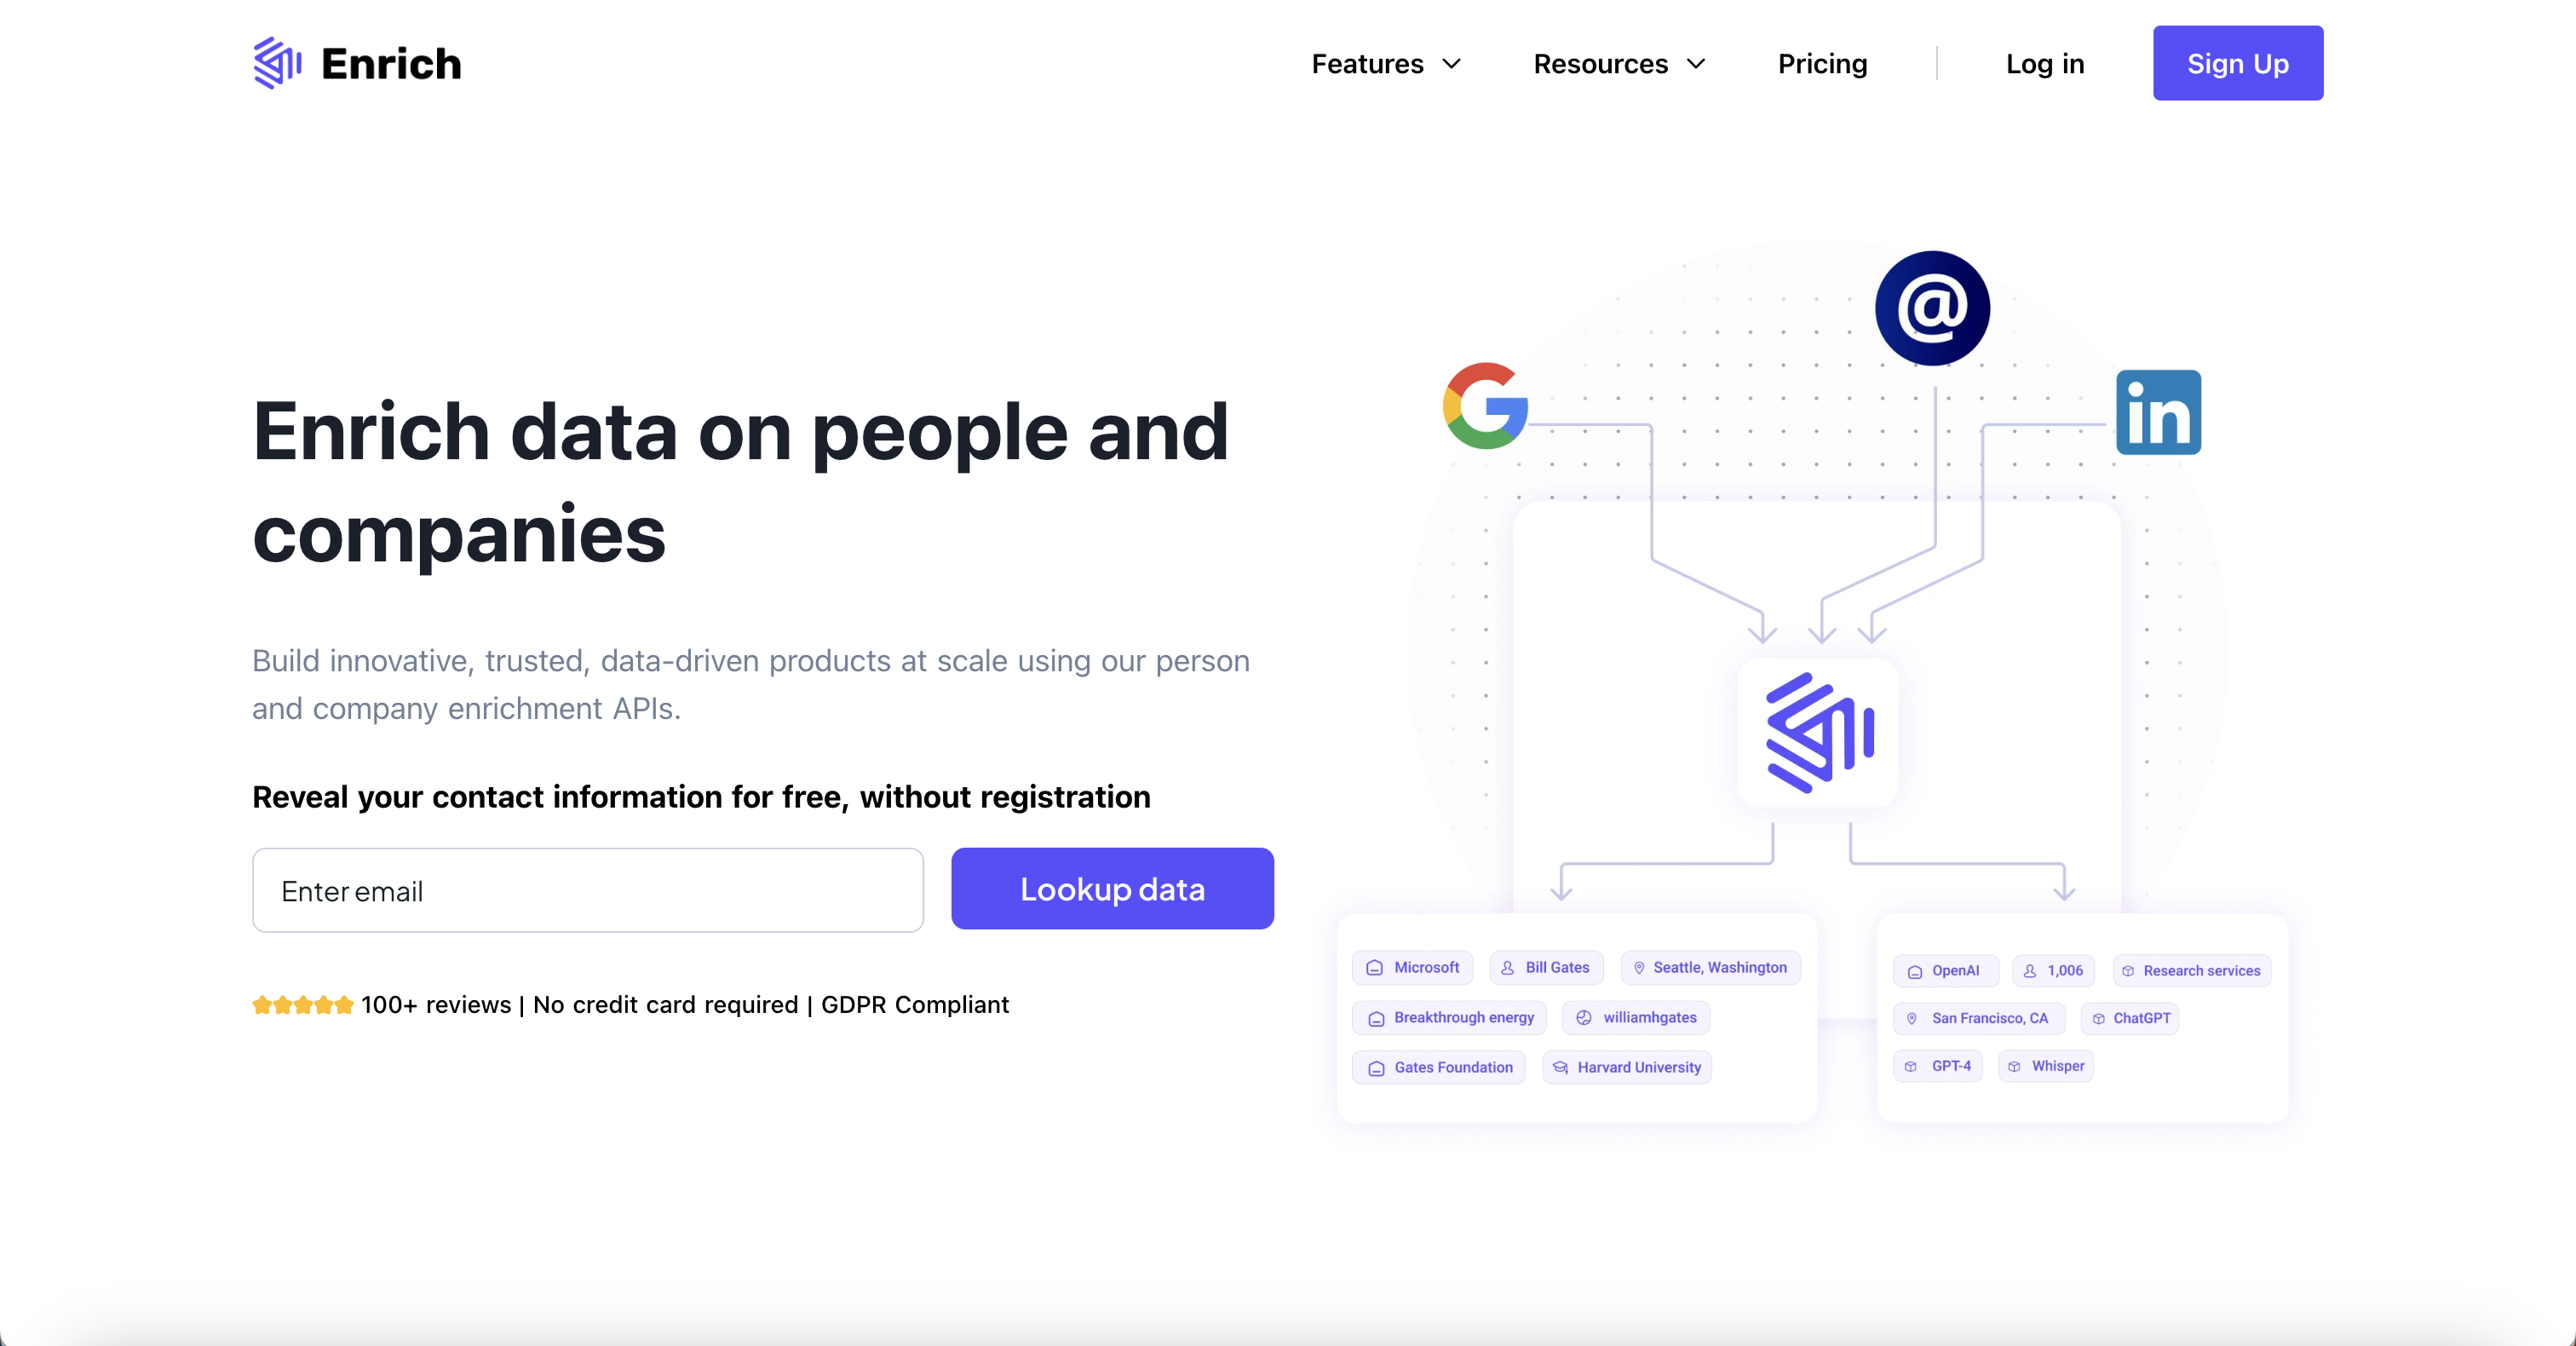 Enrich data on people and companies